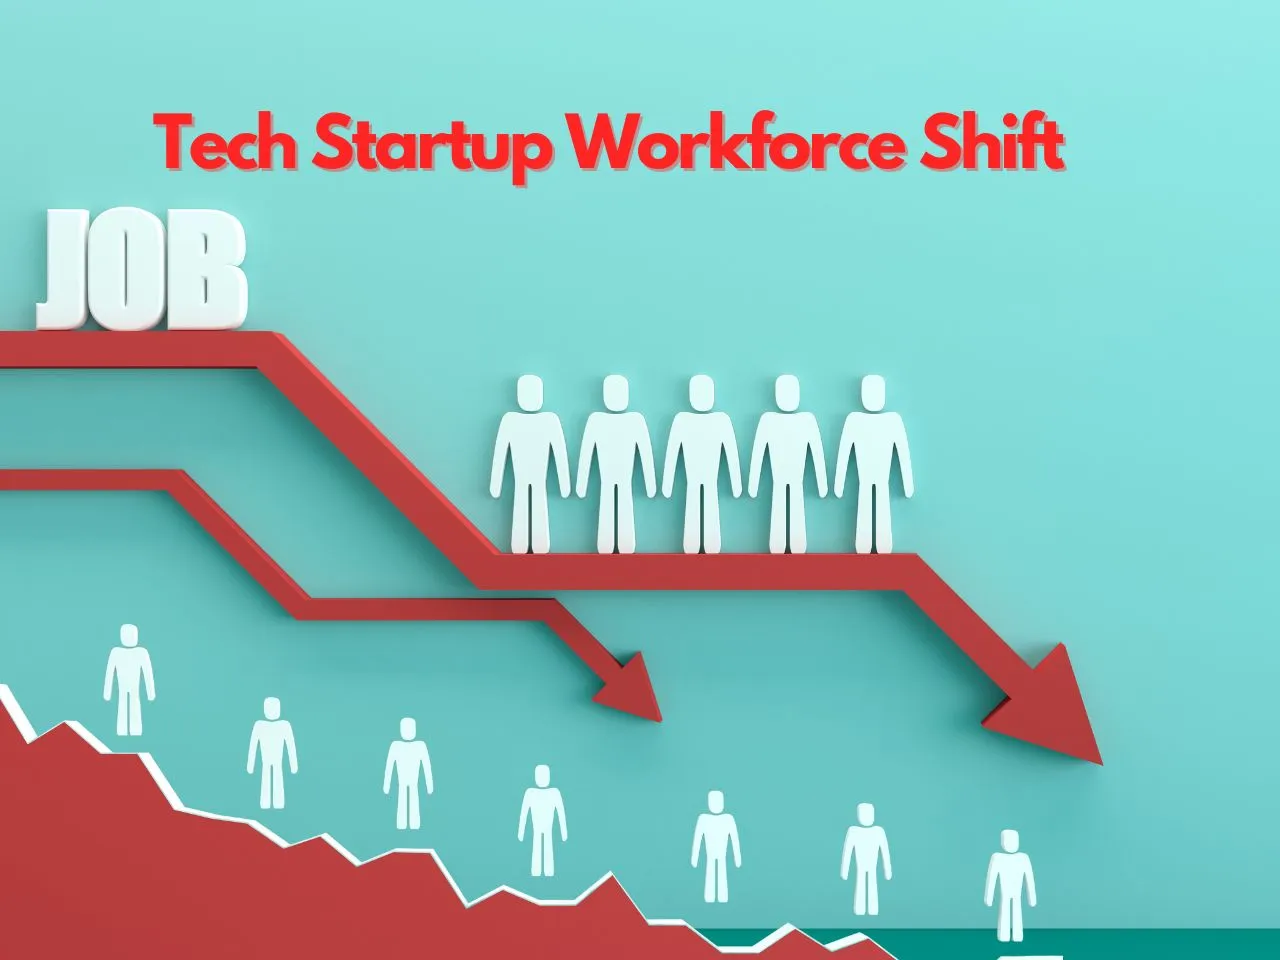 Indian Tech Startup Layoffs Increase This Week, But Drop by 60% in Q1